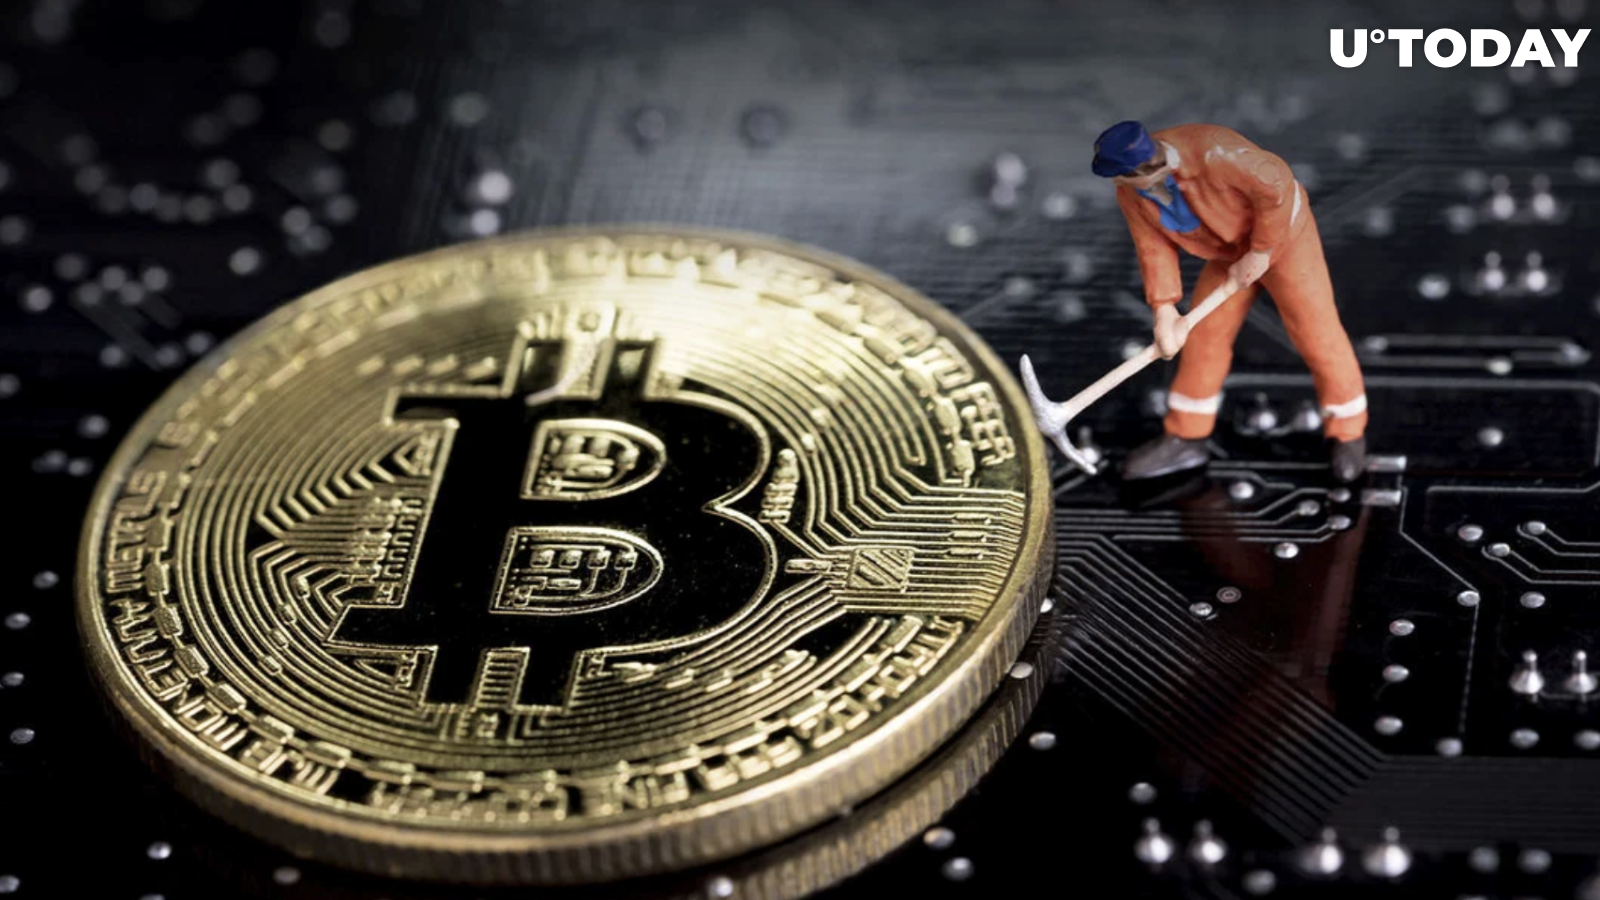 Miners' Bitcoin Holdings Hit Lowest Level in 12 Years